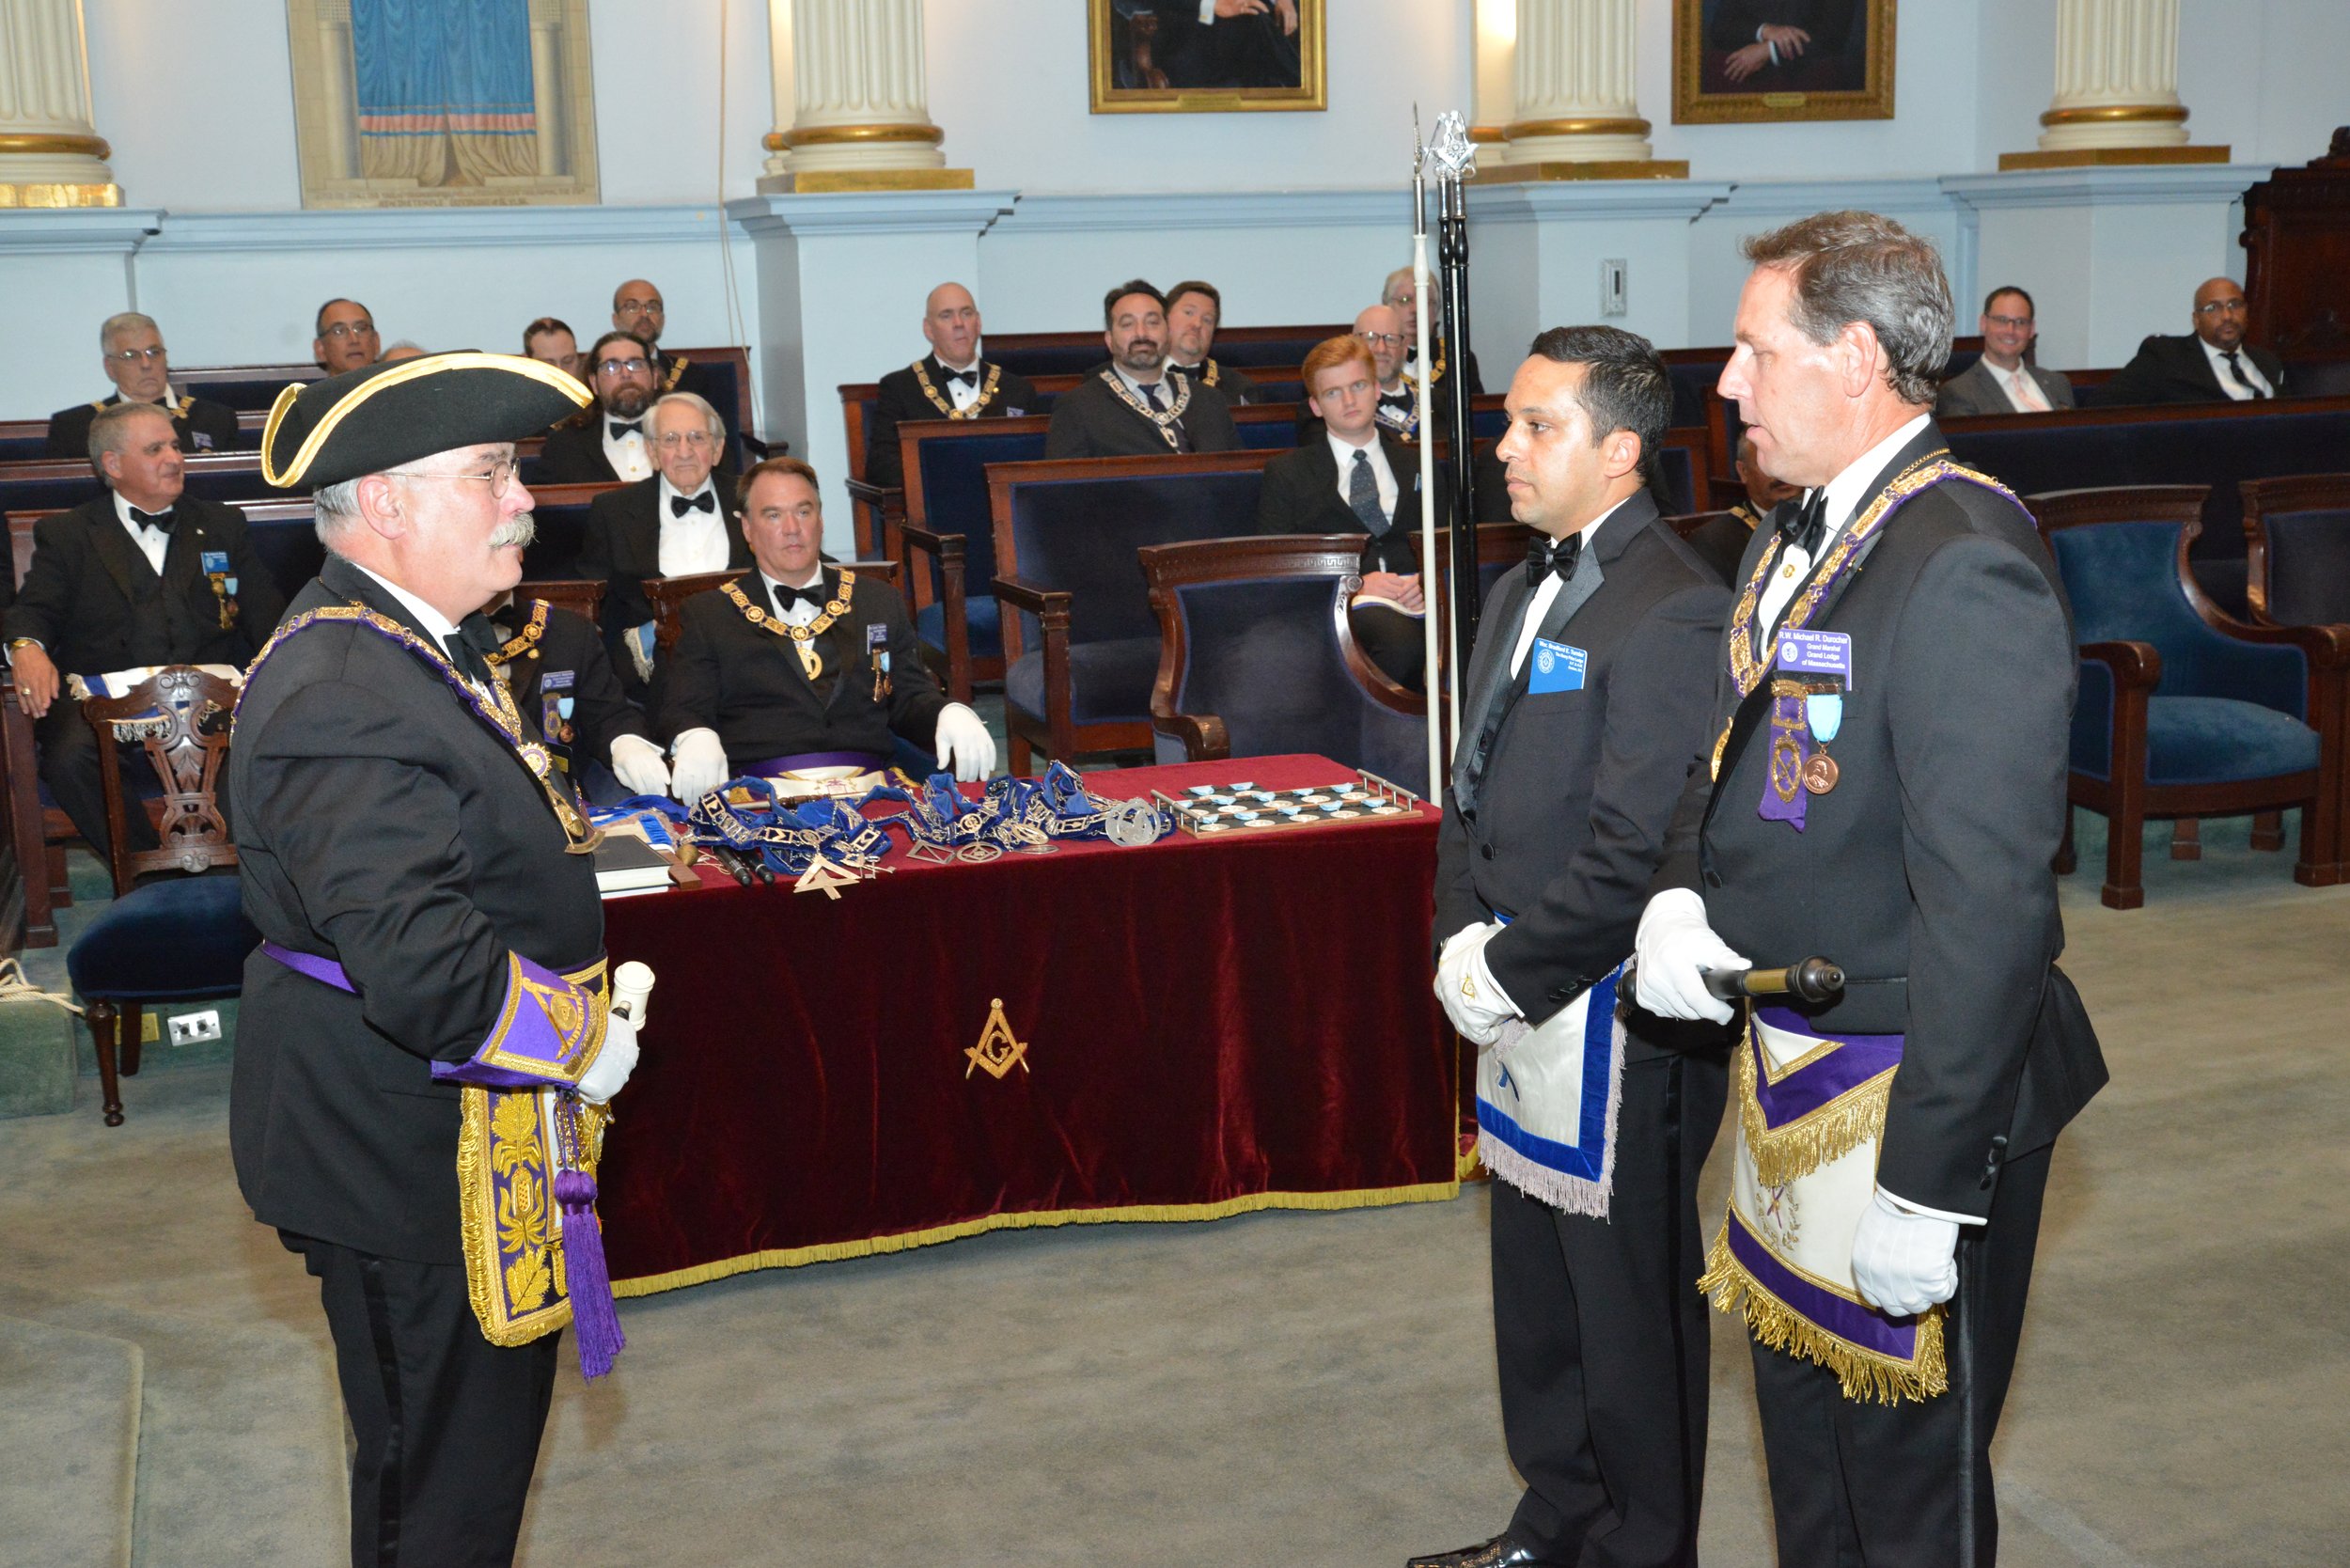  Wor. Brad Turnier conducted to the East to be installed as Master of The Henry Price Lodge 